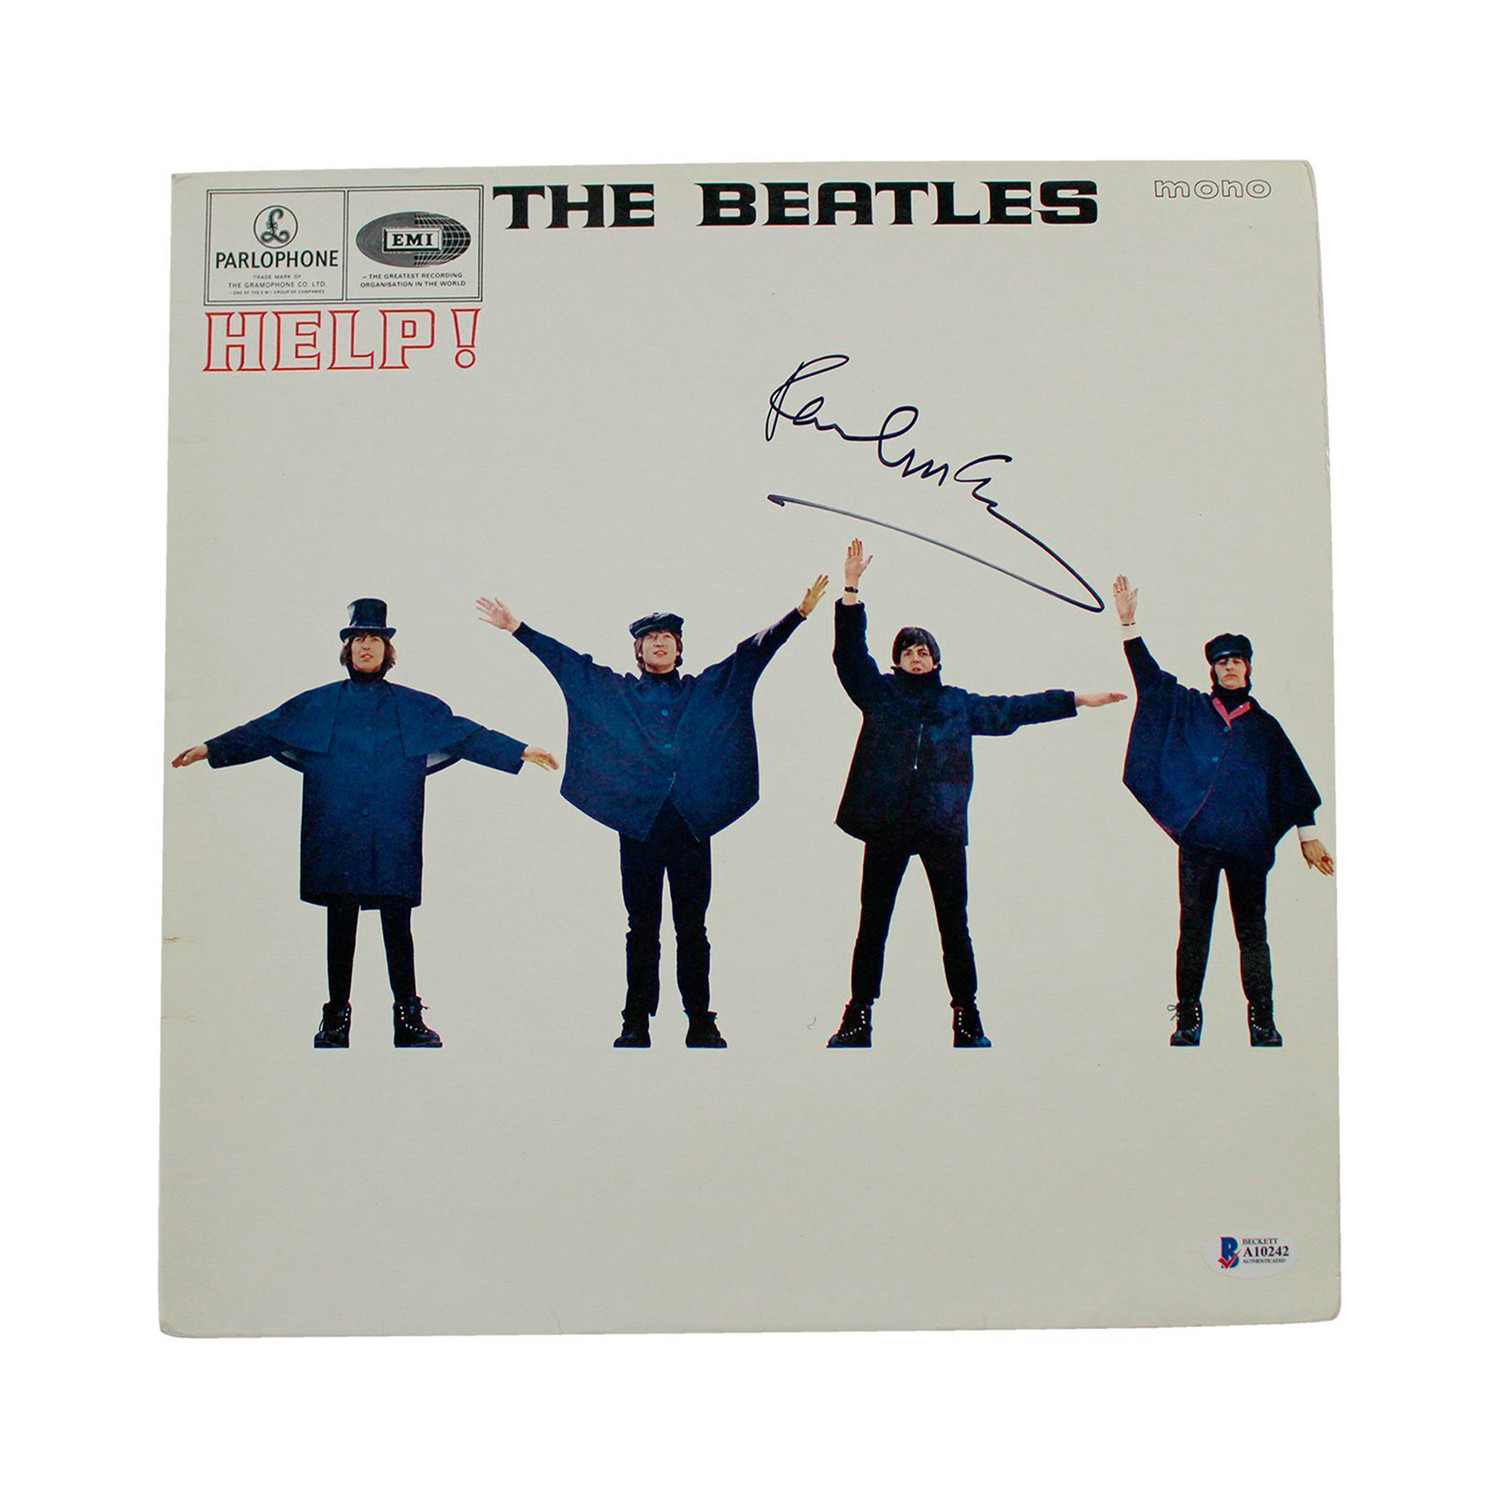 Paul Mccartney Signed The Beatles Help Record Album Cover Steiner Sports Touch Of Modern